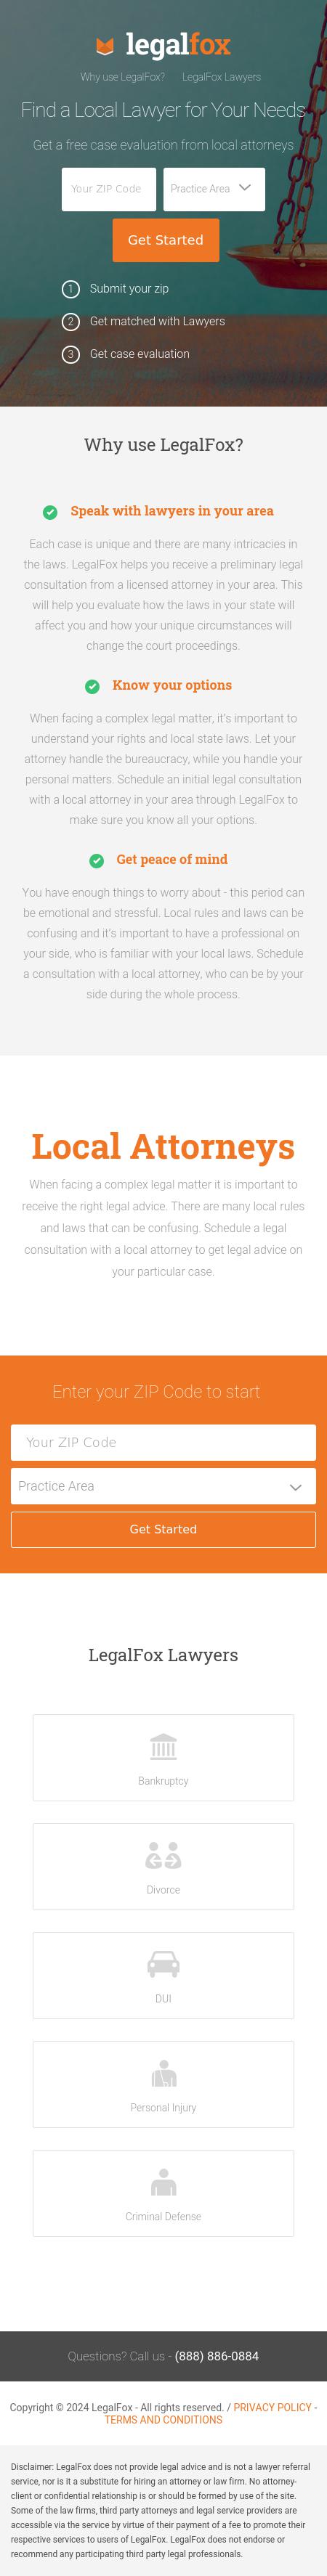 Find a Local Attorney - Moberly MO Lawyers